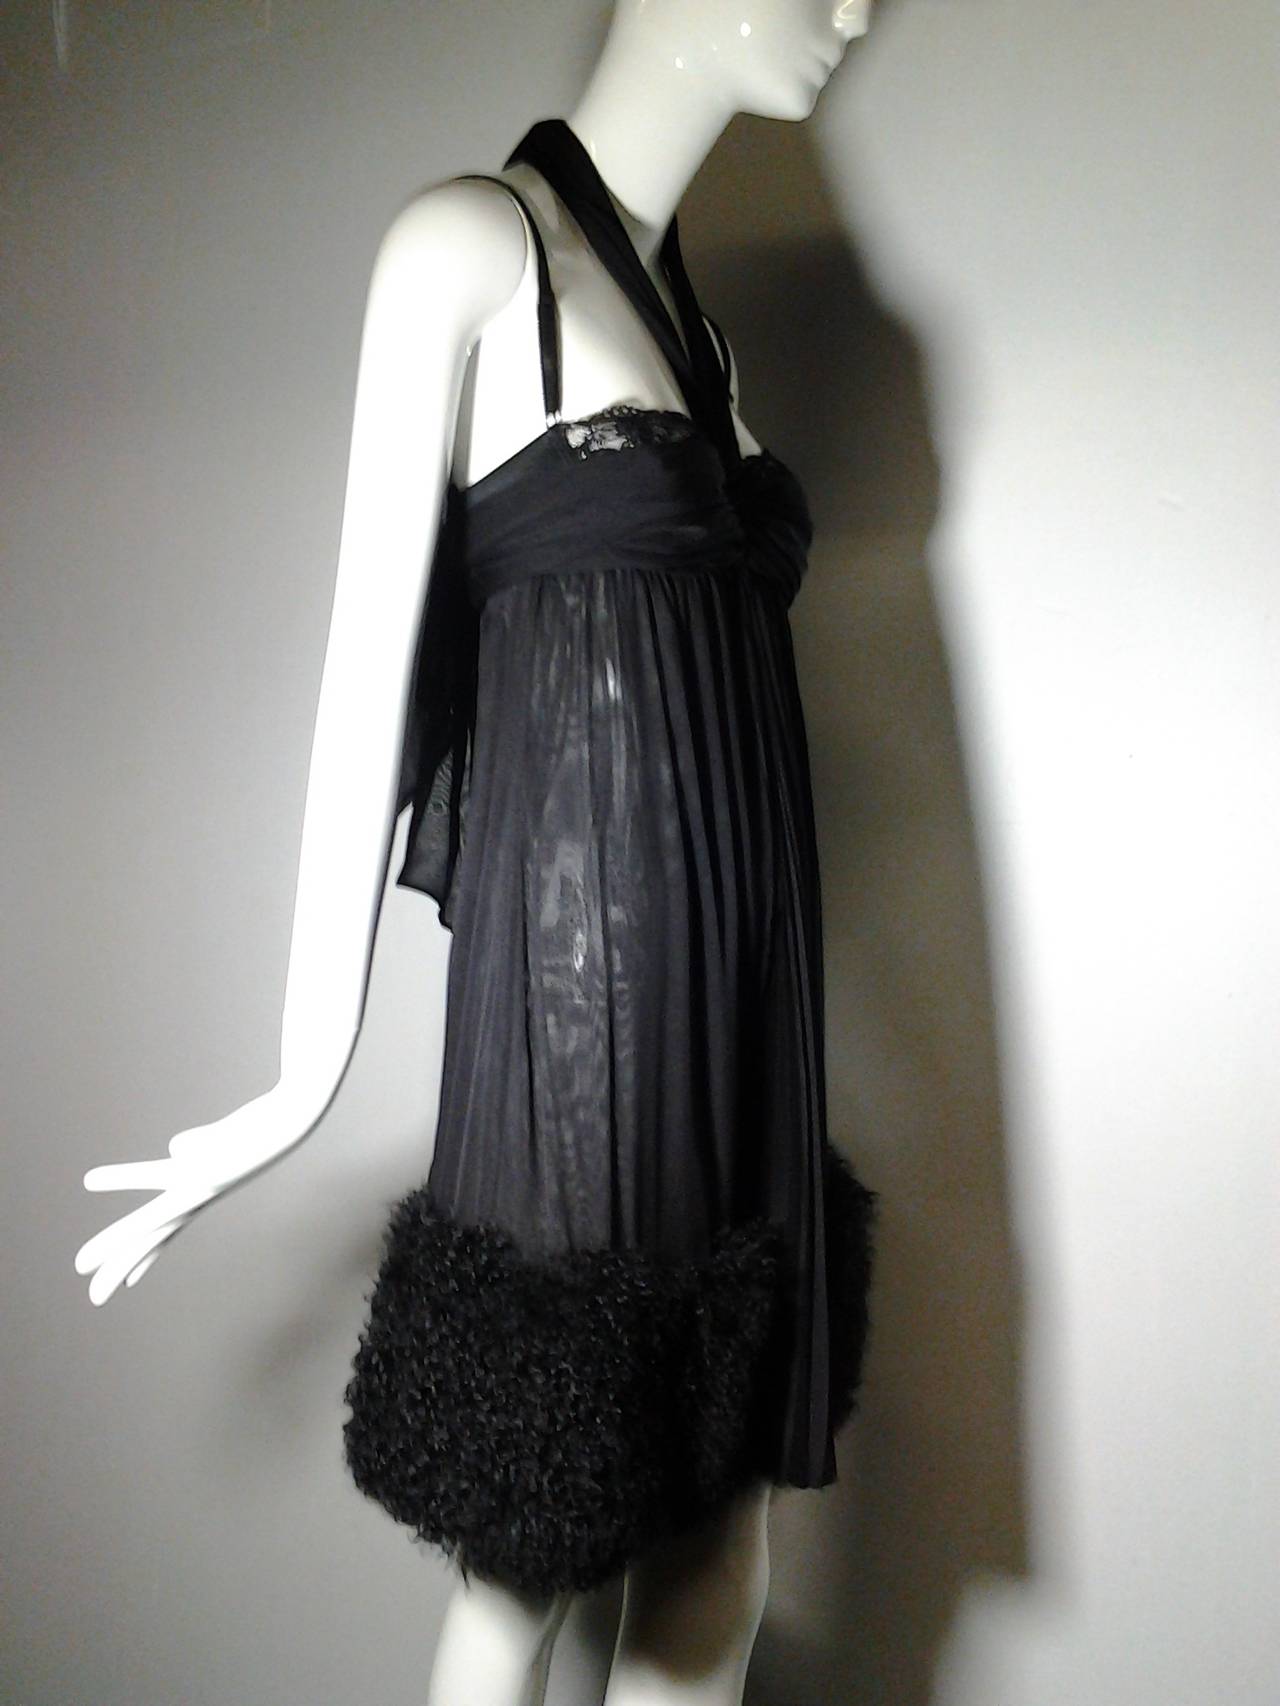 A super sexy D&G black silk chiffon babydoll negligee style cocktail dress with dramatic, soft Mongolian lamb hem and iconic Dolce and Gabbana attached peek-a-boo brassiere.

Never worn.